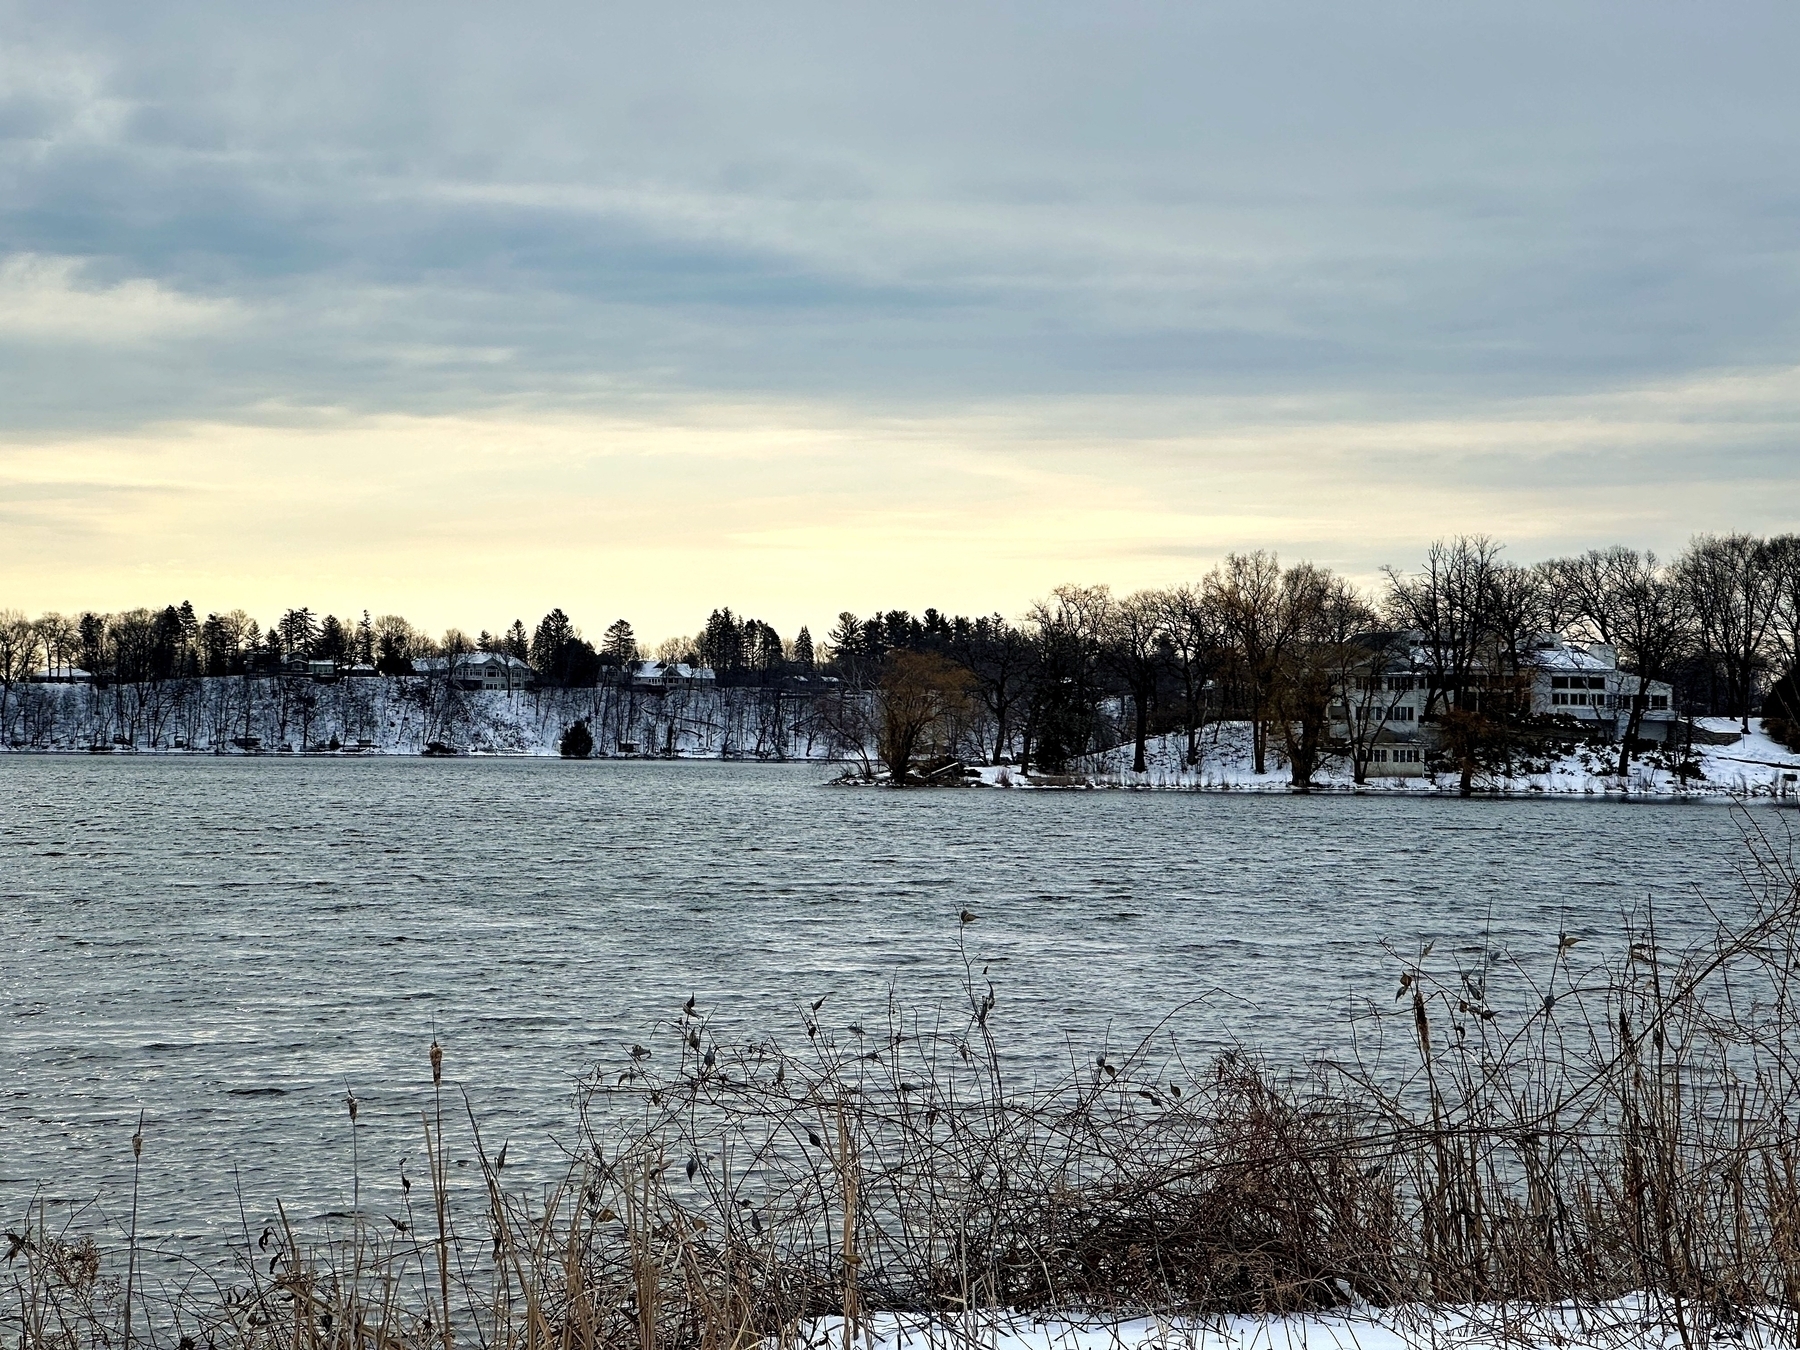 A serene lake with rippled water, foreground of dried reeds, backdrop of snow-covered trees and houses under a cloudy sky.